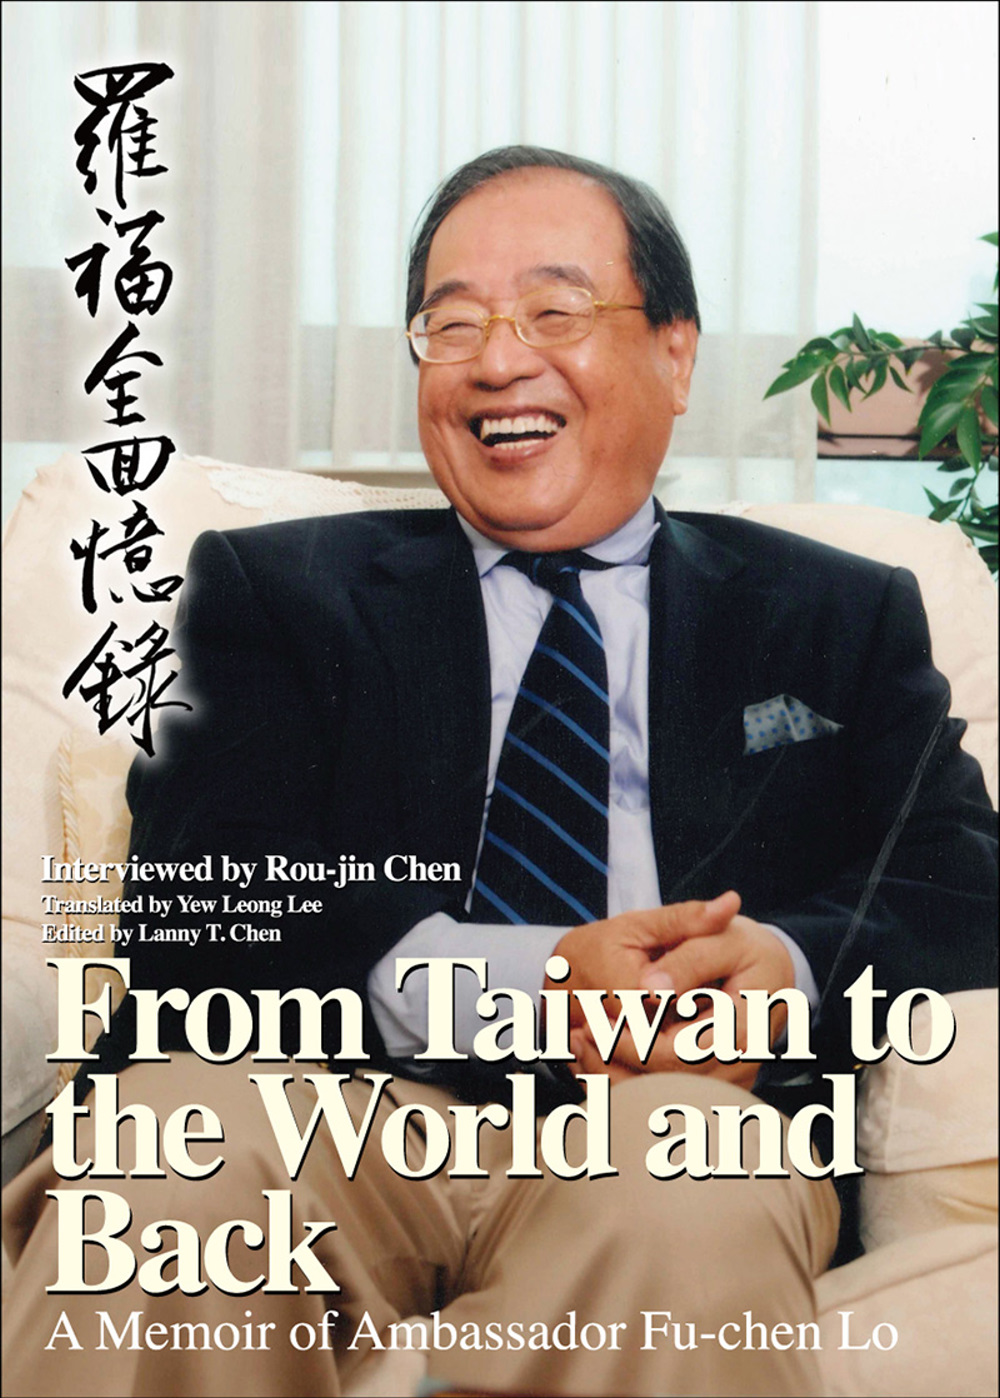 From Taiwan to the World and Back: A Memoir of Ambassador Fu-chen Lo